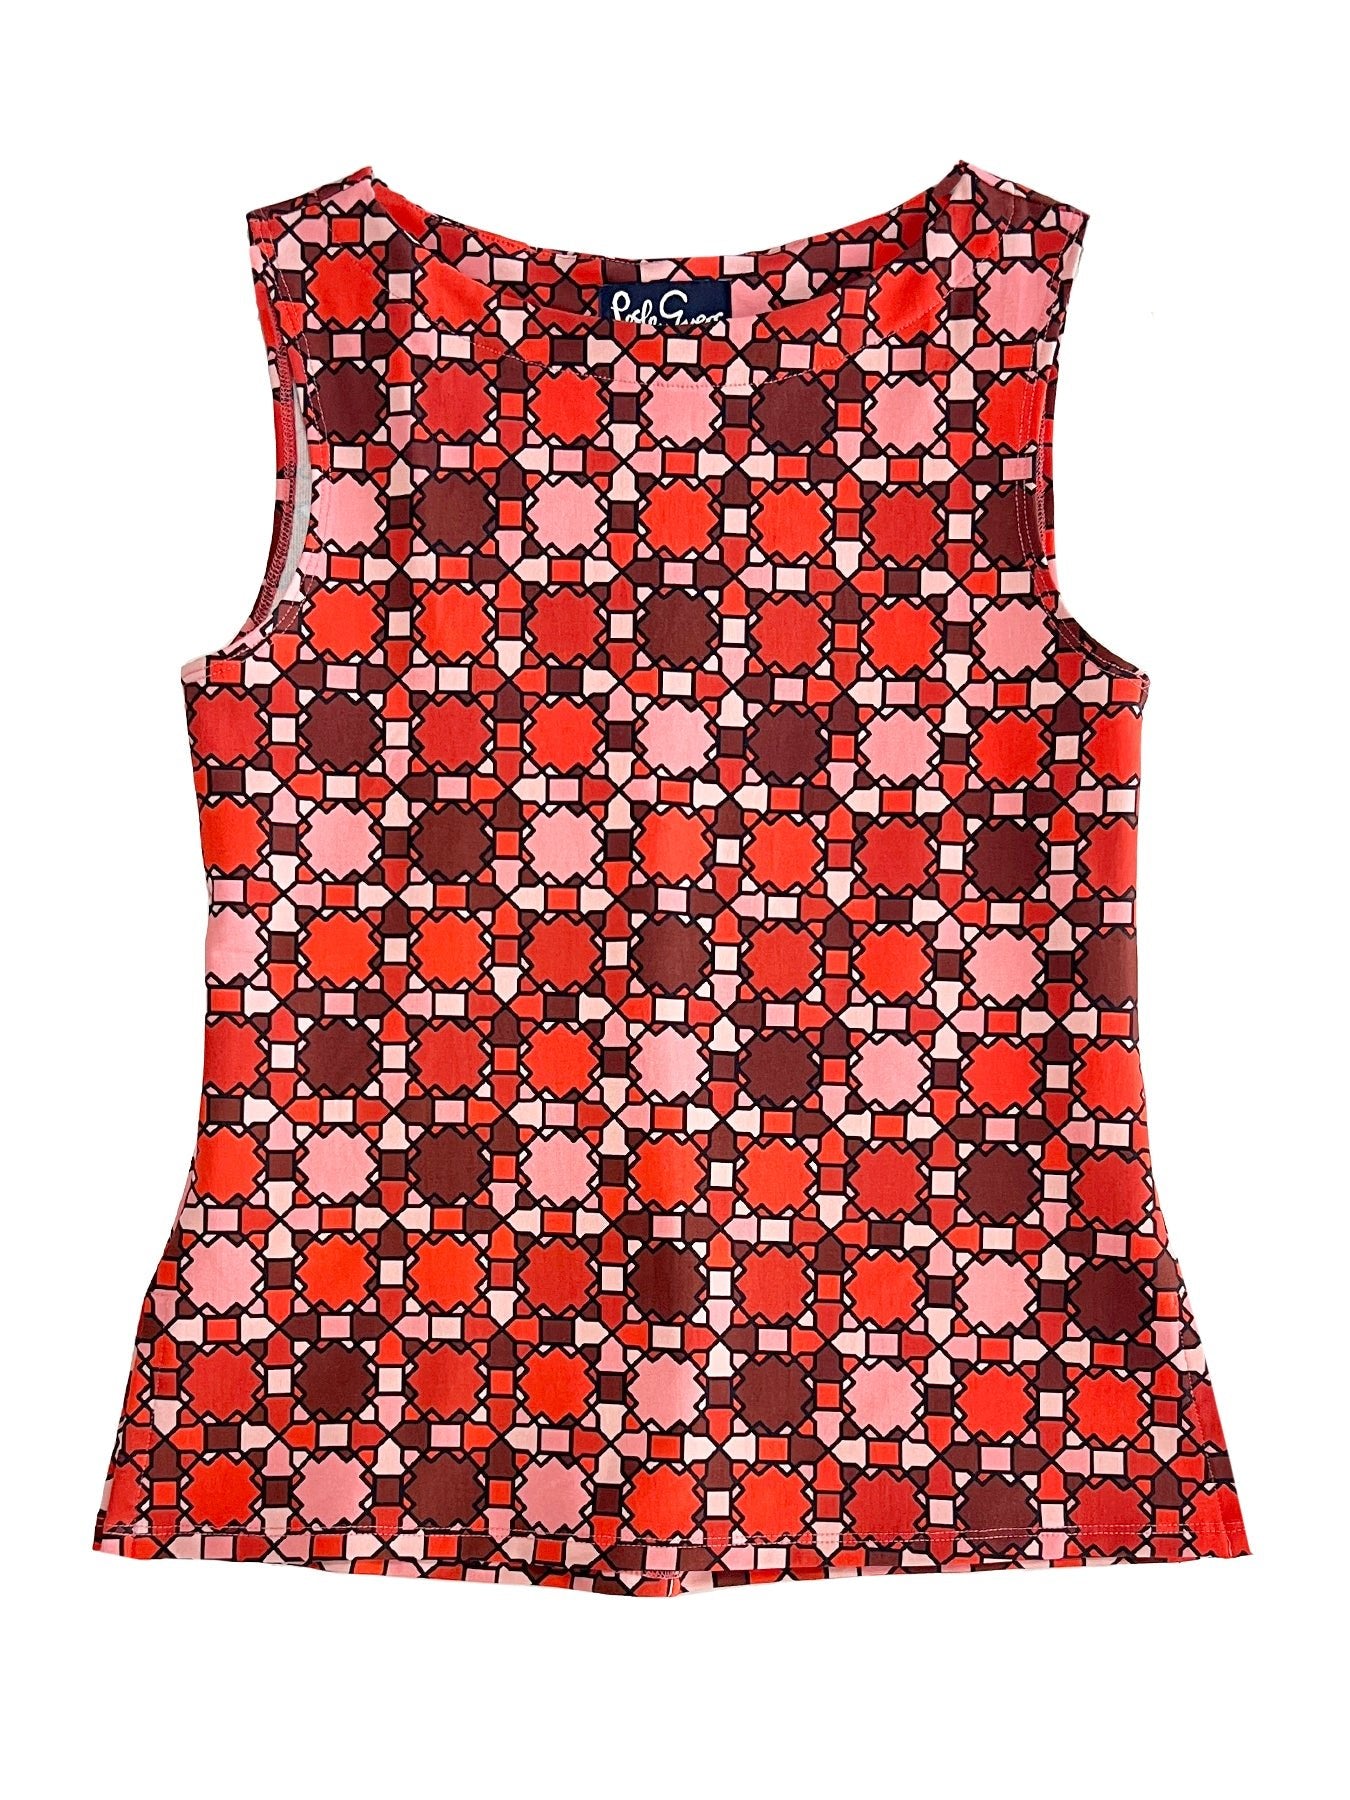 STELLA top Stained Glass Red - Lesley Evers-Best Seller-New Arrivals-Red